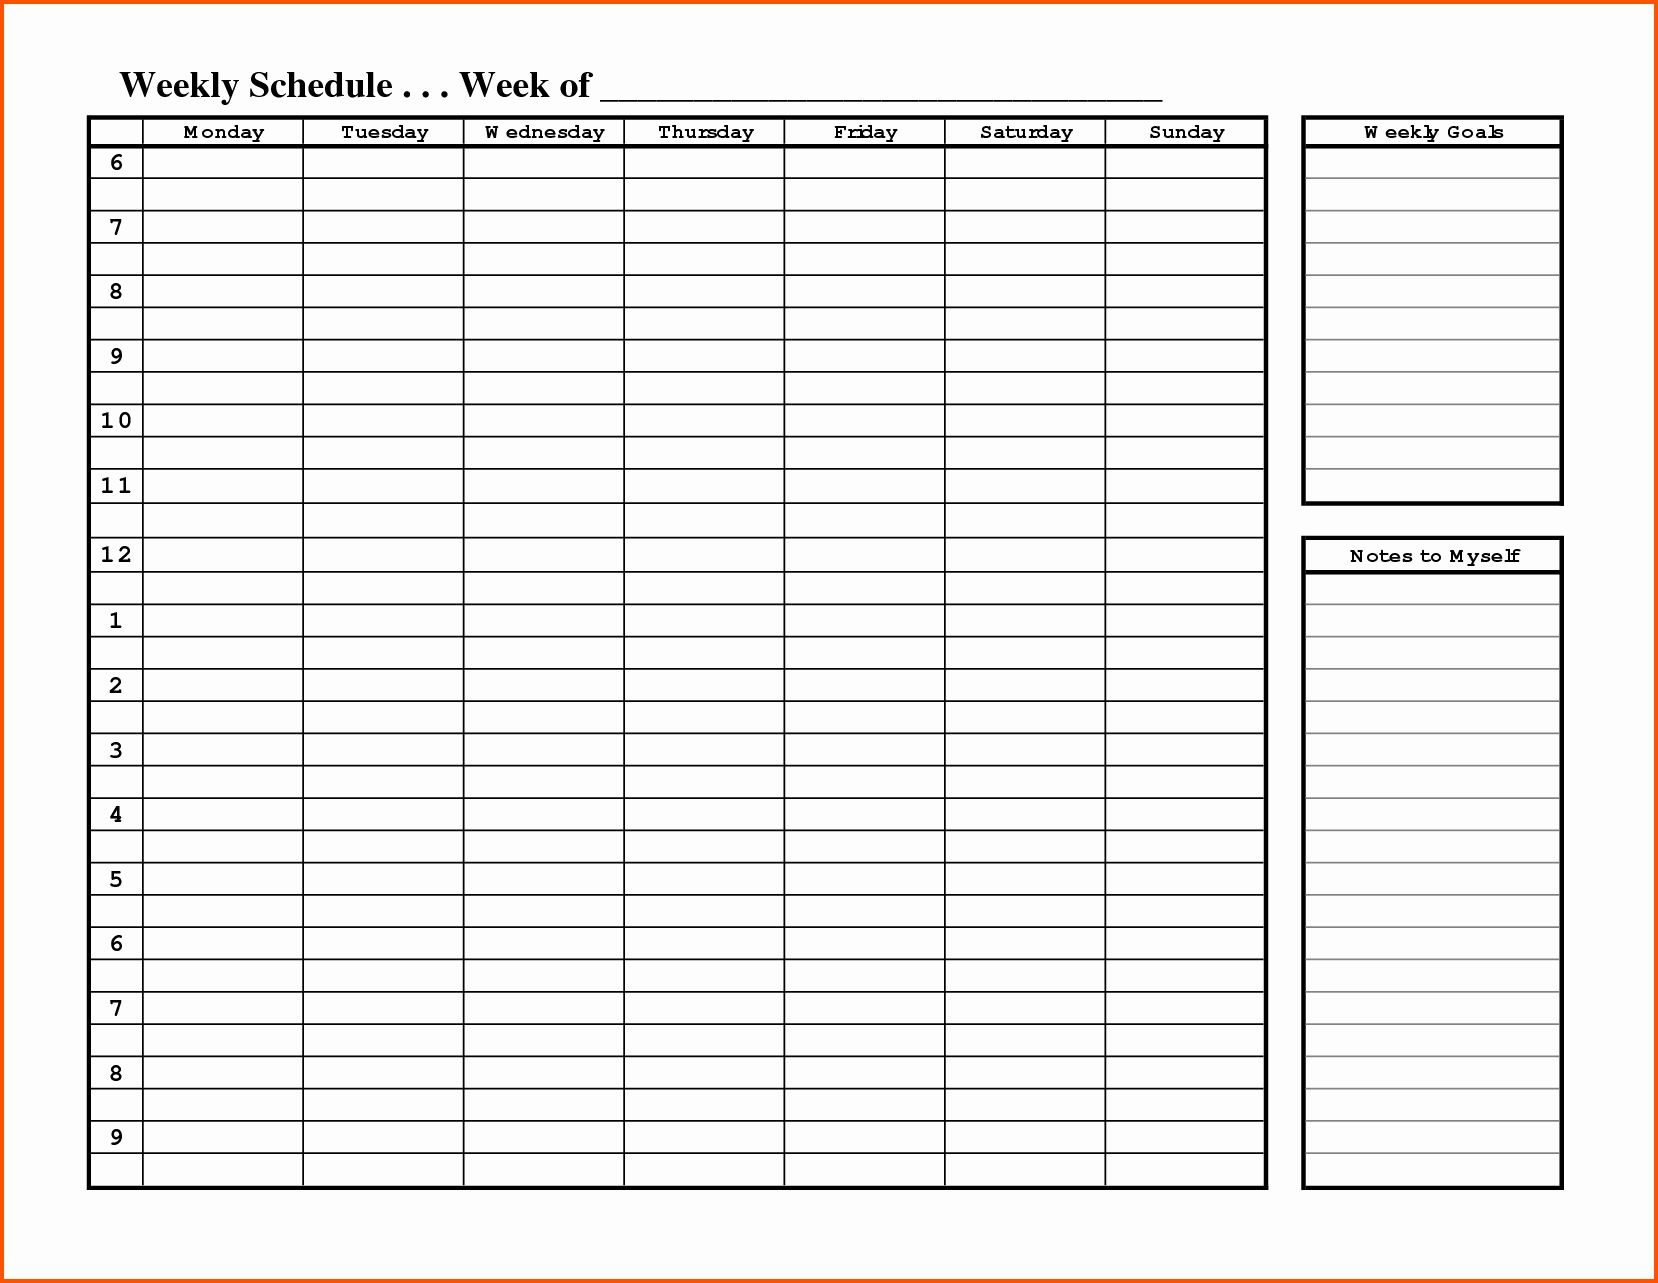 Weekly Hourly Planner Template Word | Daily Calendar throughout Monday Through Friday Calendar Template Word